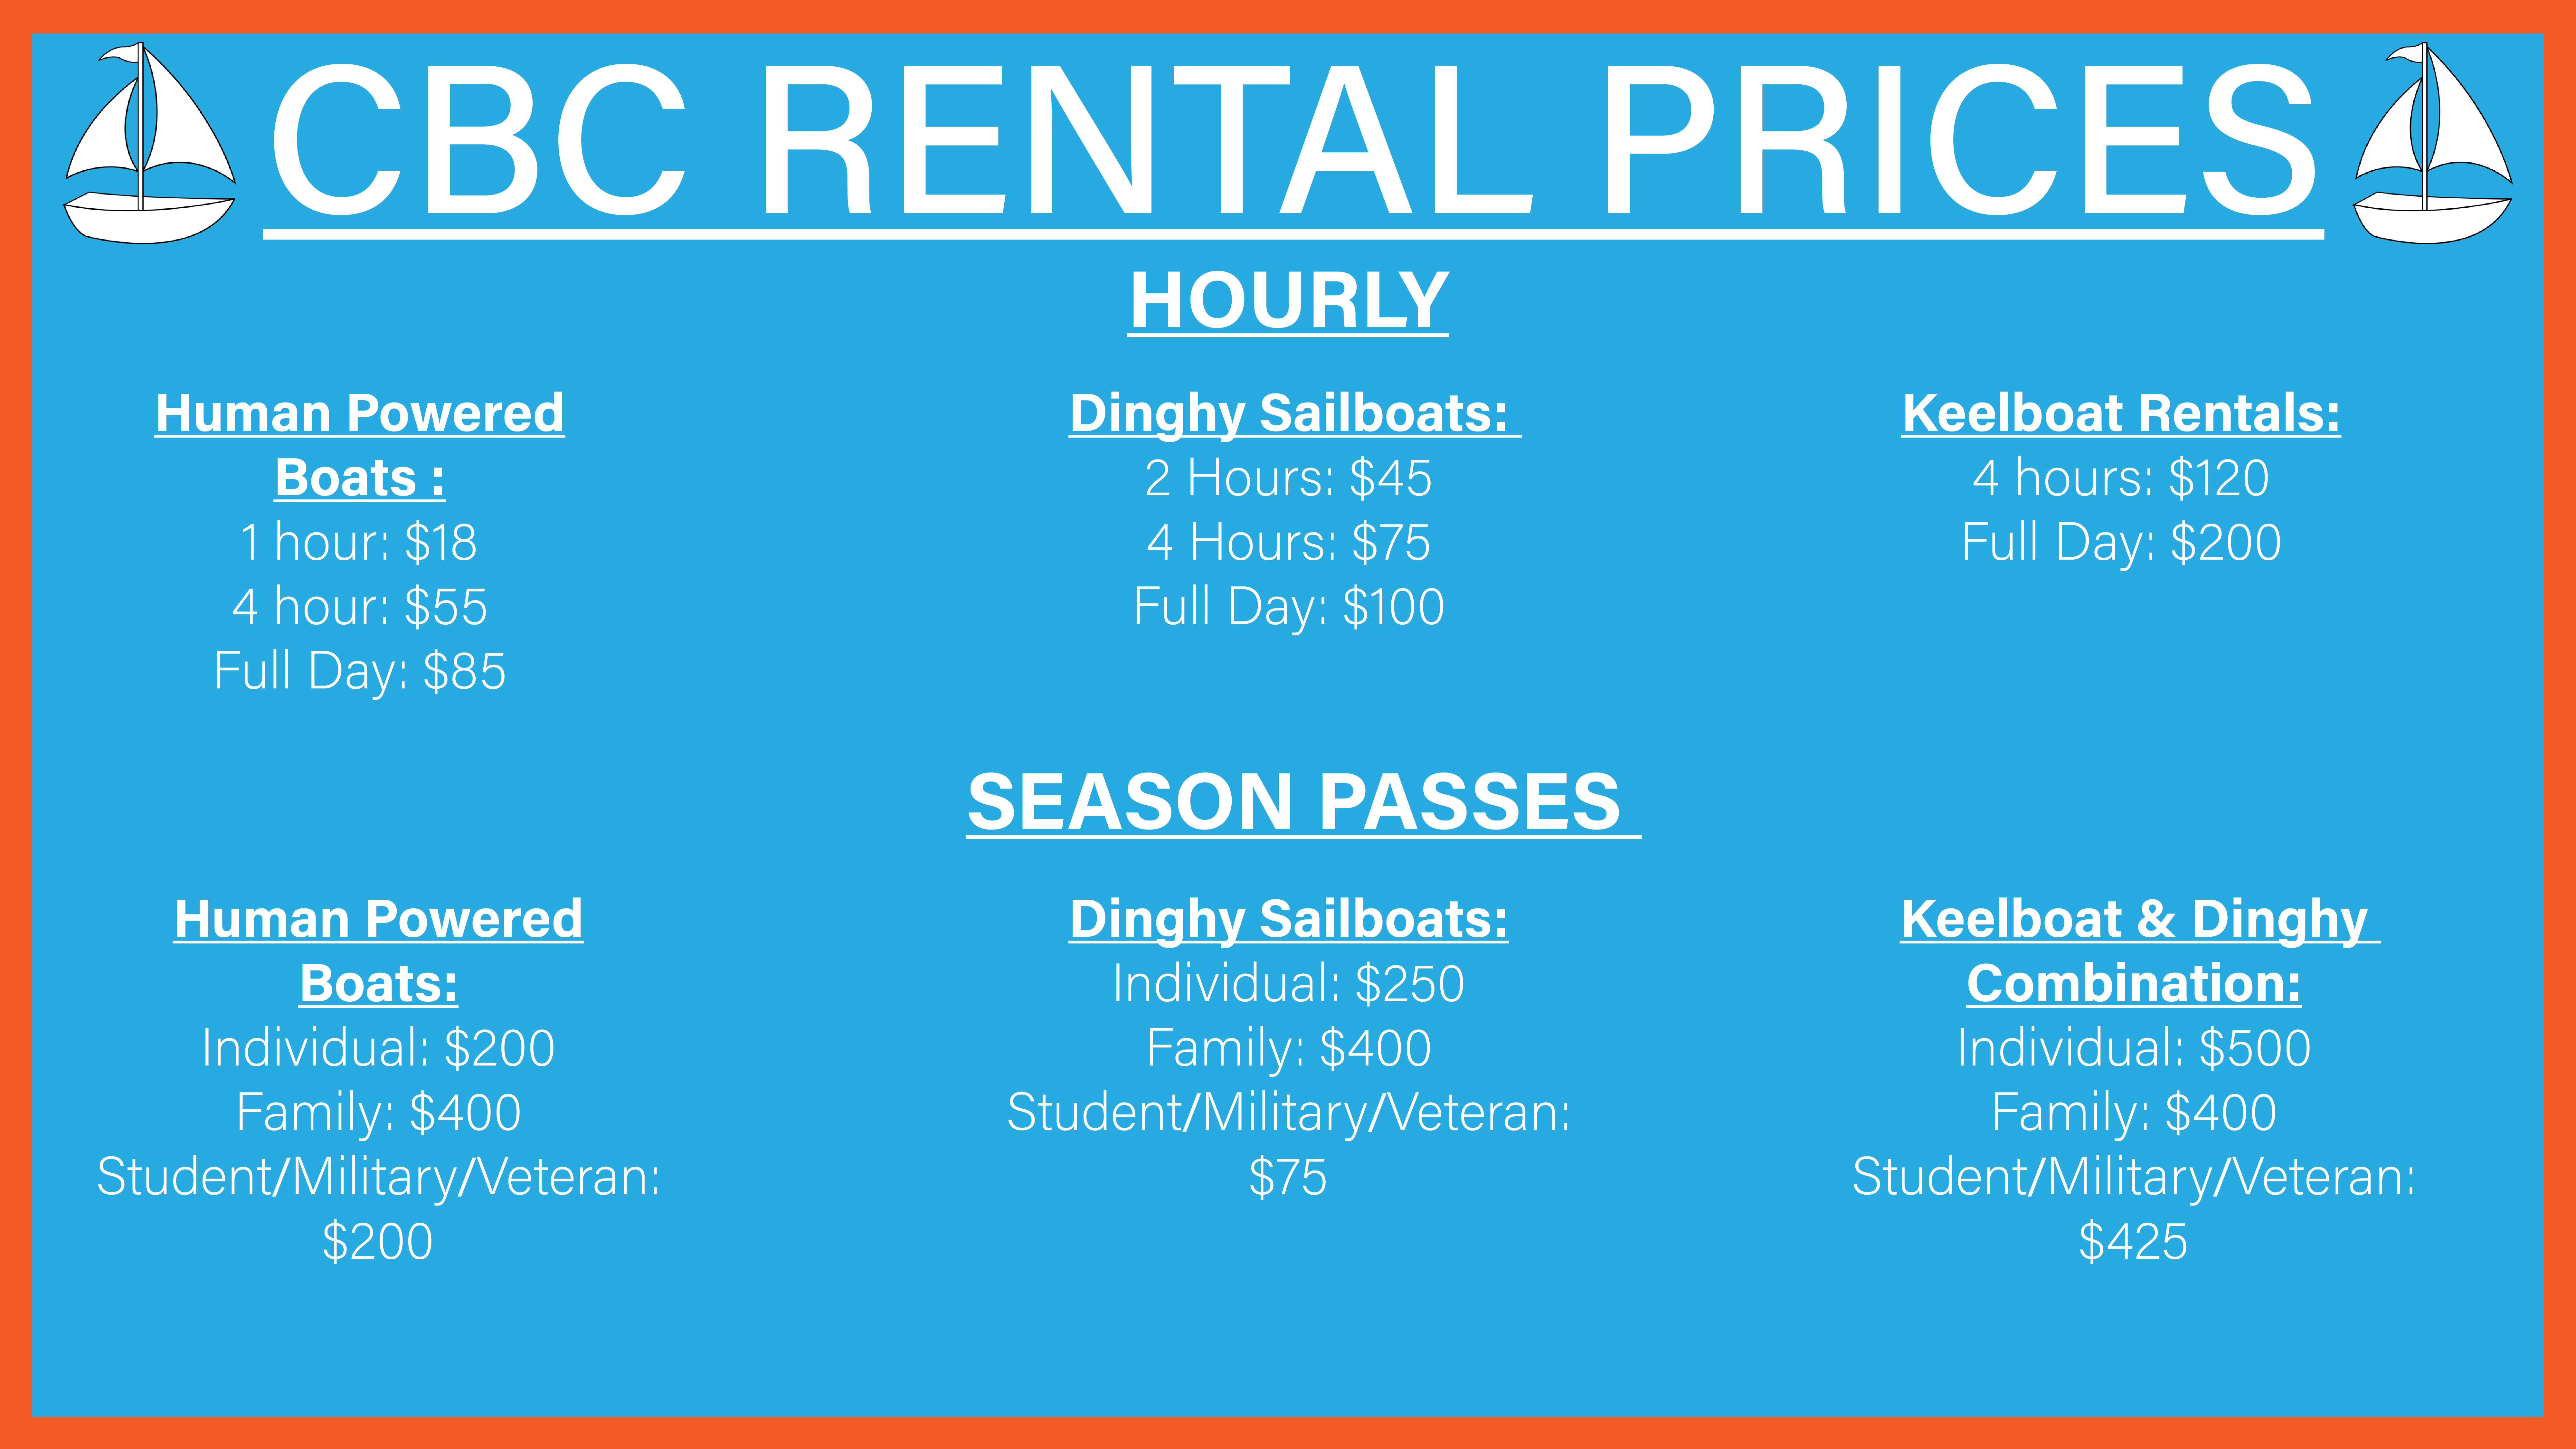 Community Boating Center pricing as of June 2019. (Infographic by Tanner Thompson)